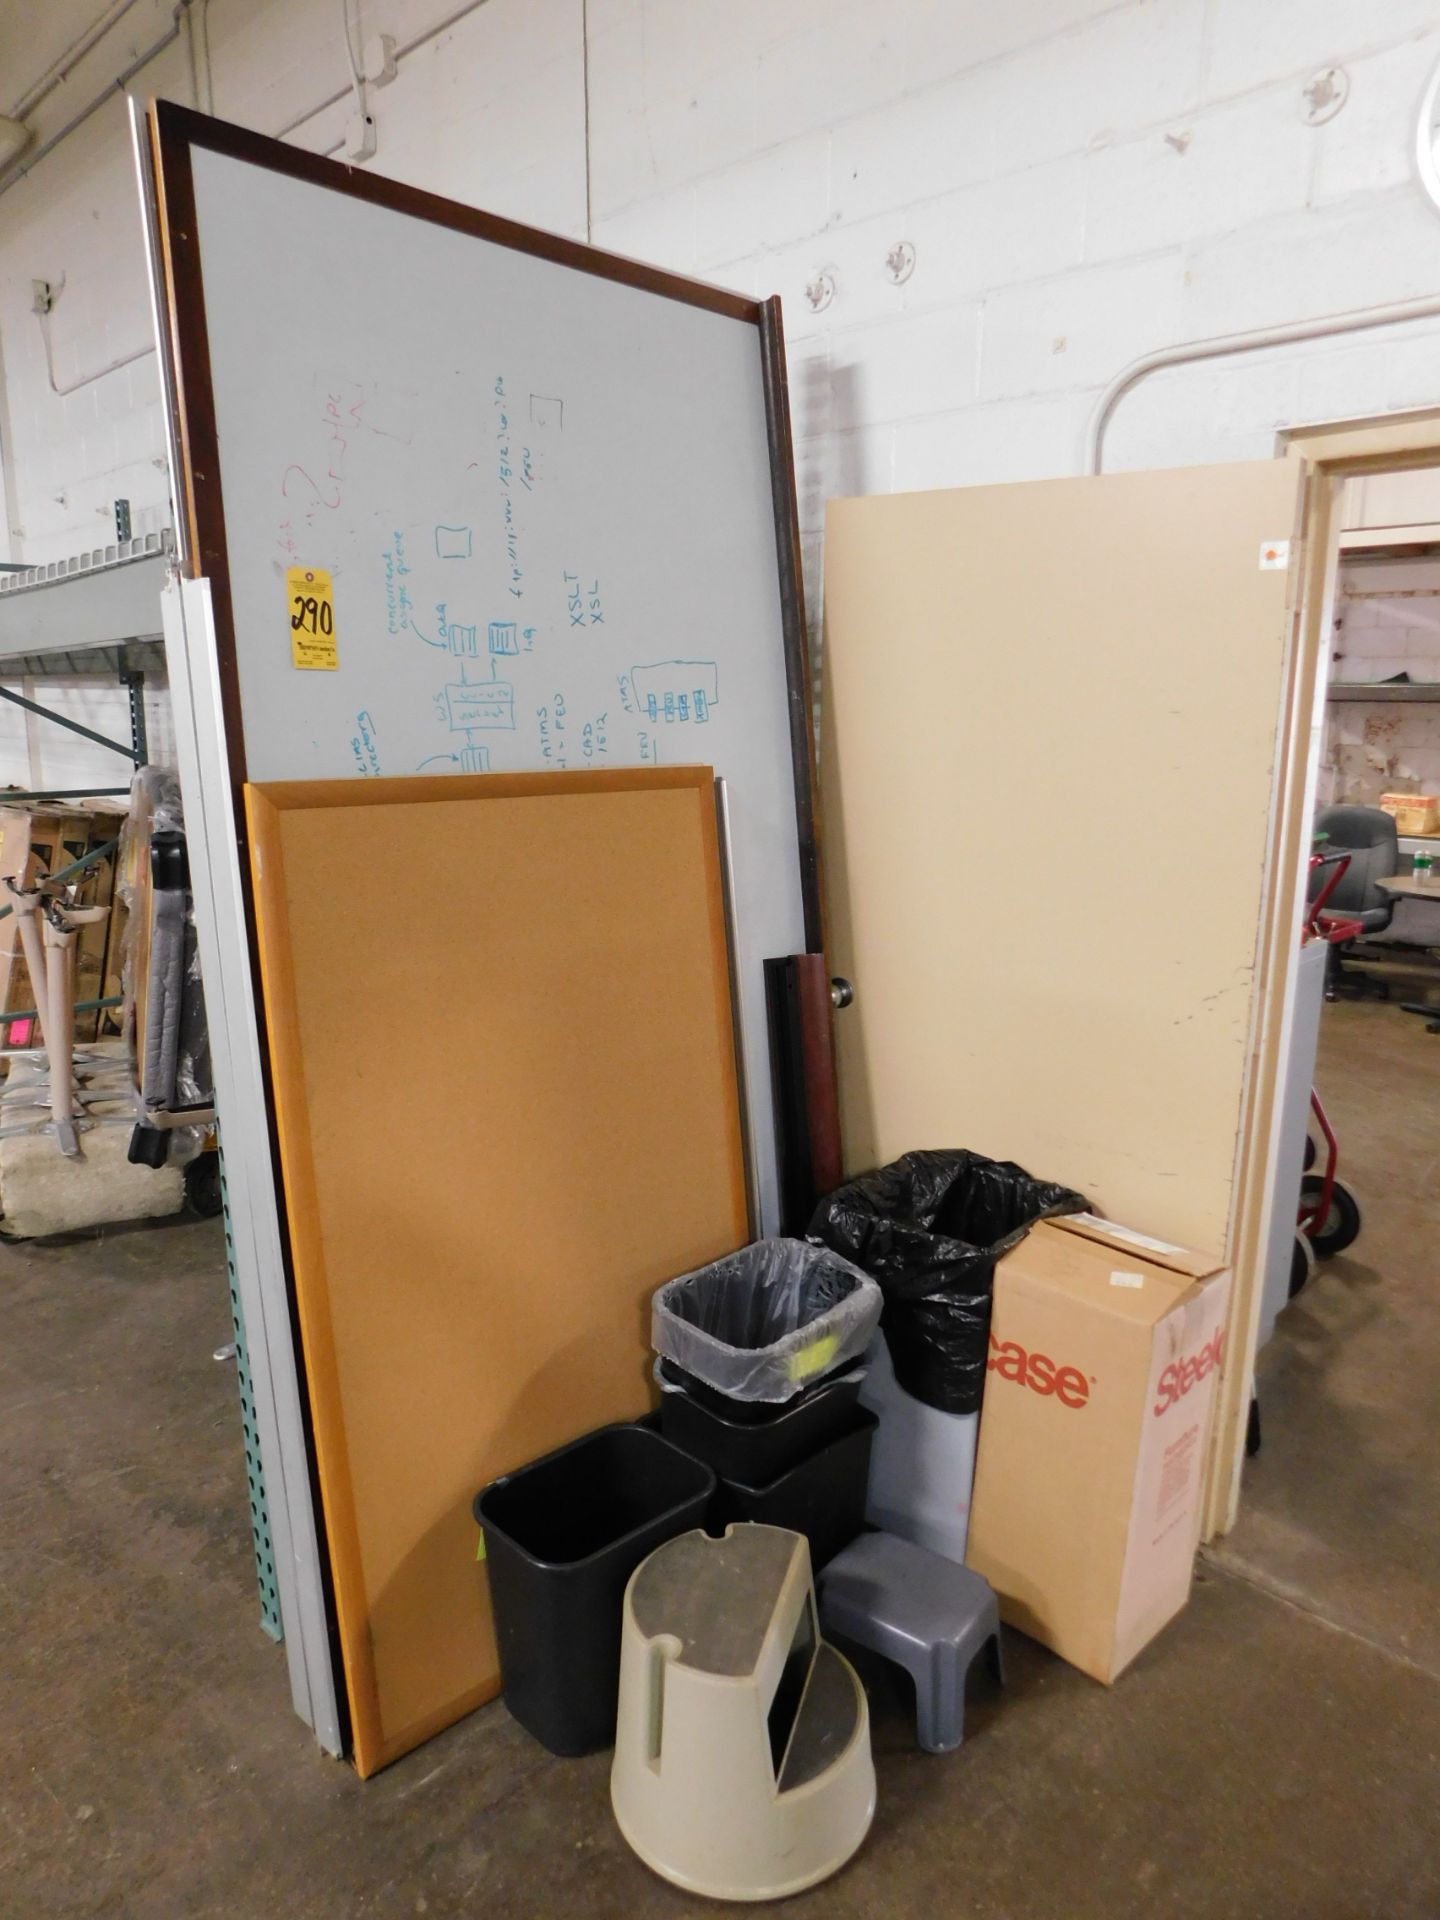 White Boards, Cork Boards, Trash Cans, and Stools